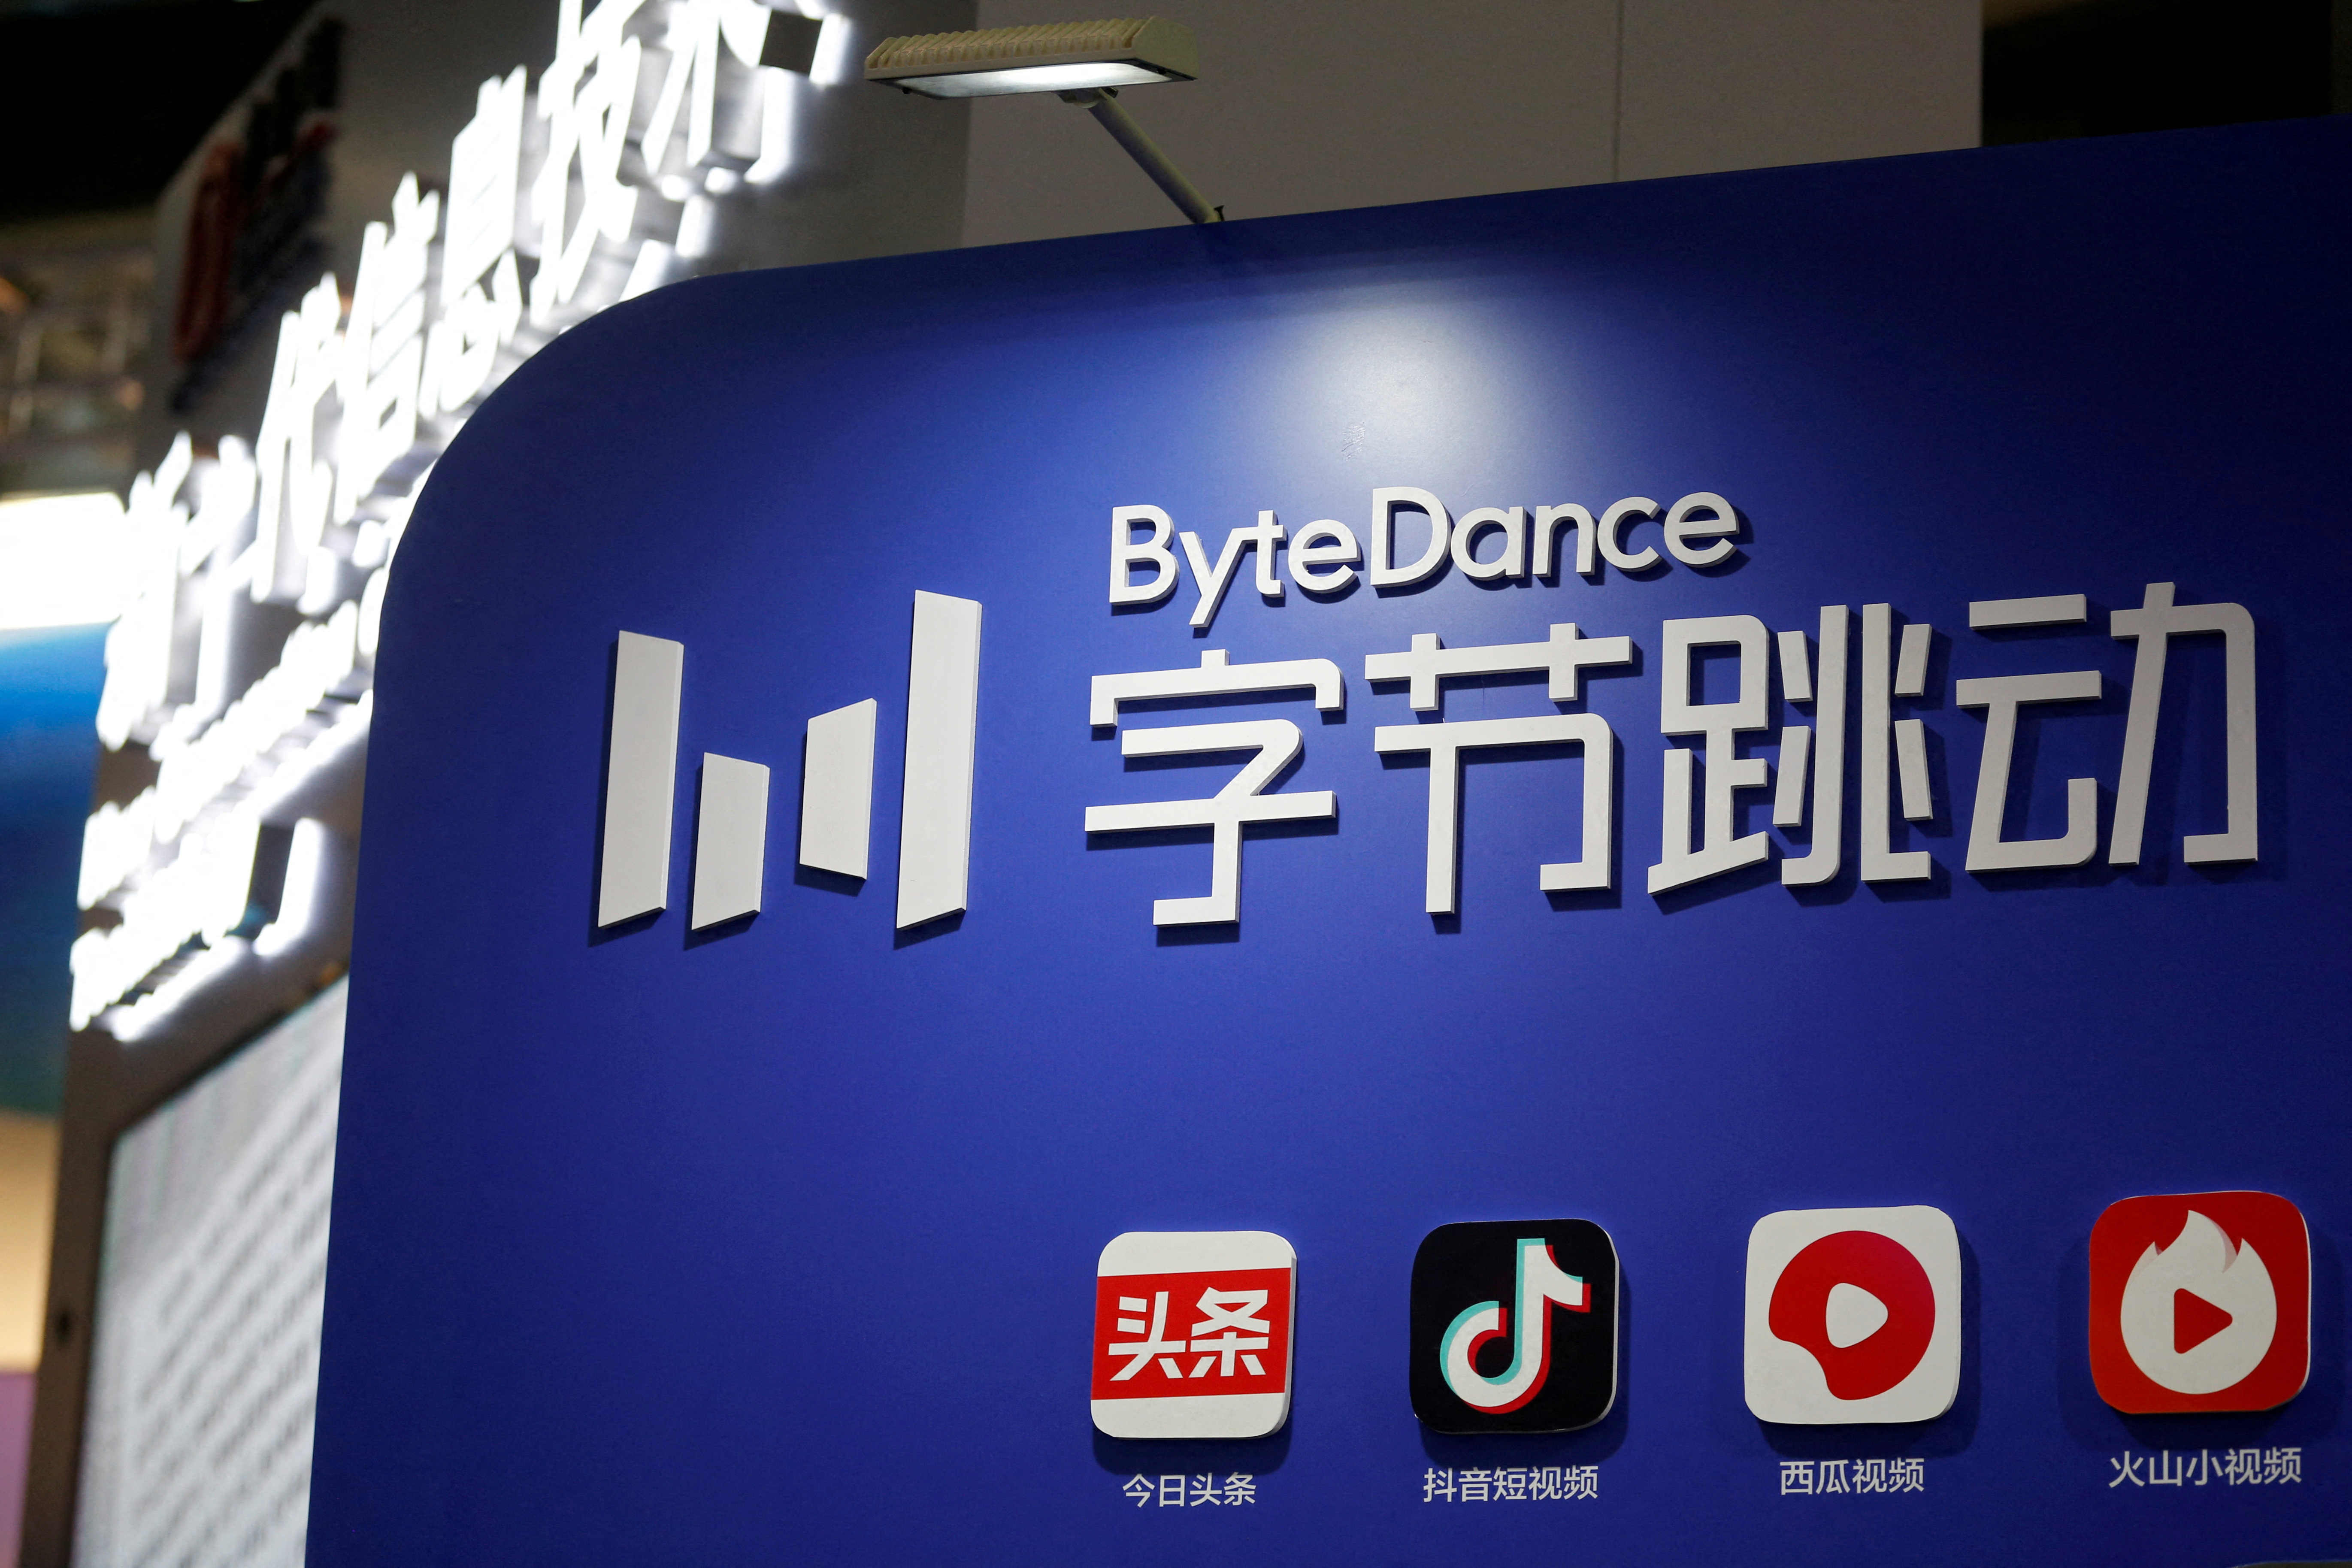 The logo of TikTok's parent company ByteDance is seen at the Zhongguancun National Innovation Demonstration Zone Exhibition Center in Beijing